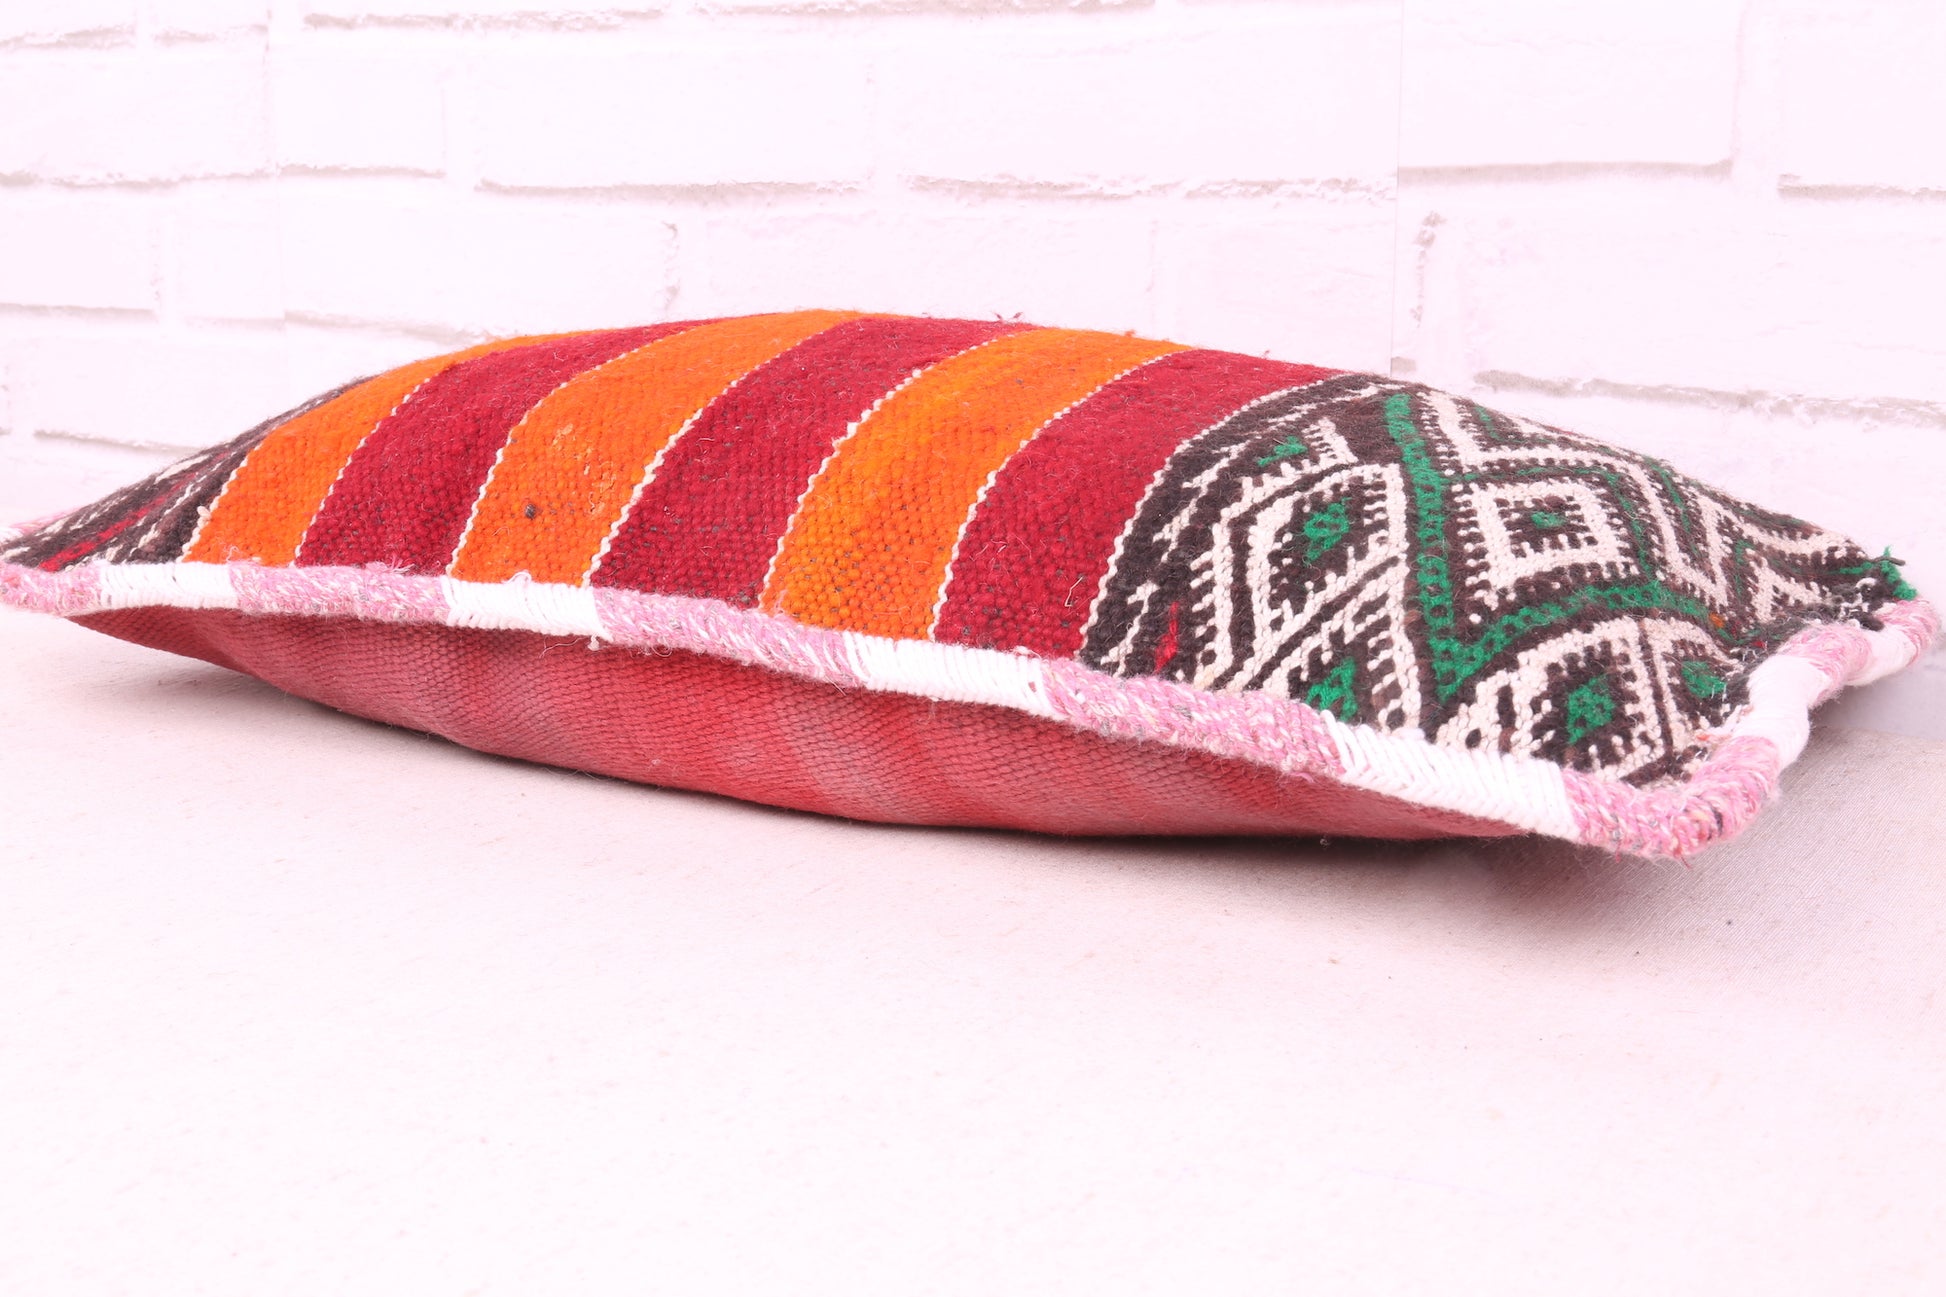 Striped Moroccan pillow 11.8 inches X 22 inches